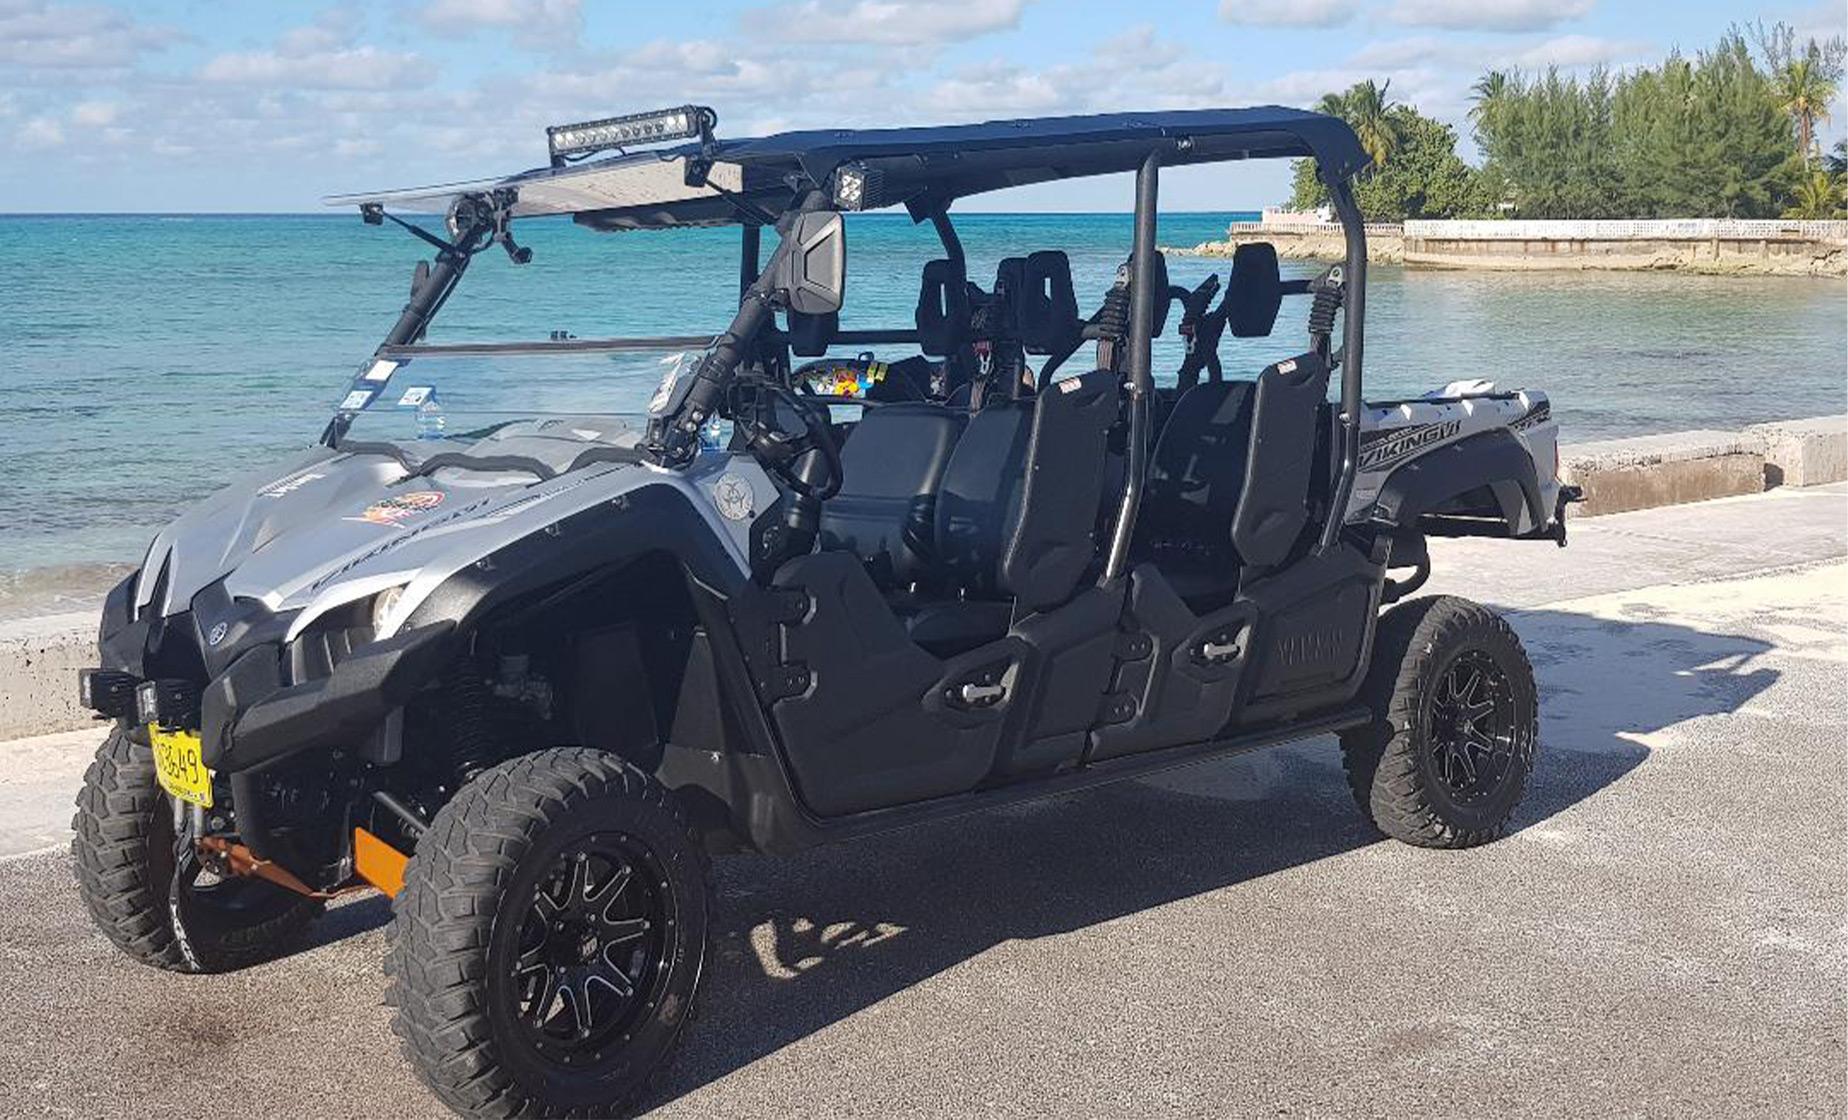 Nassau by Open Air Buggy